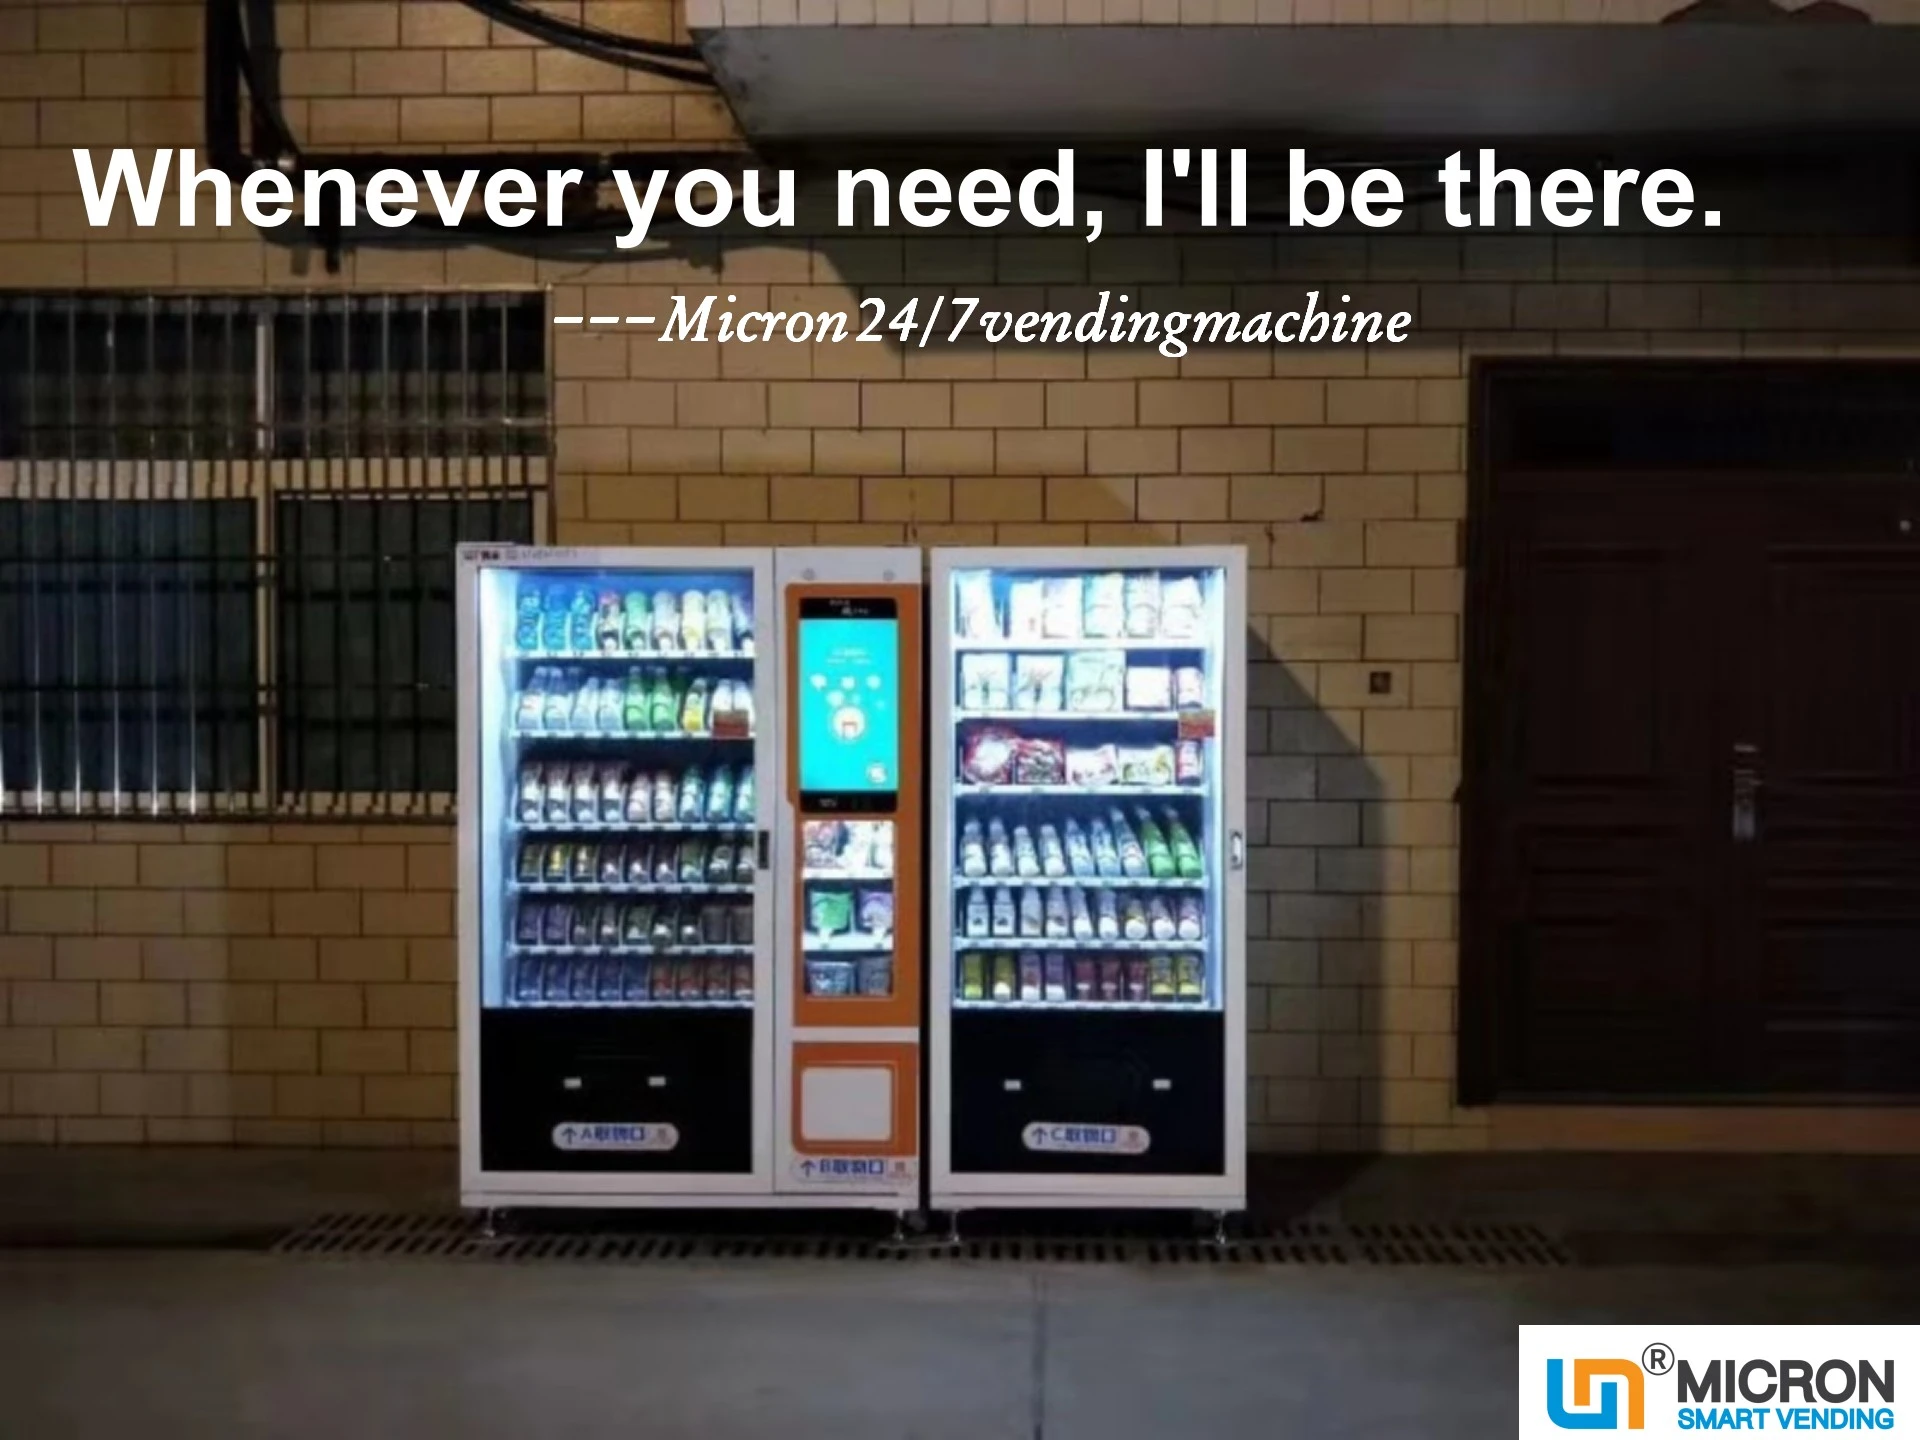 Is it reliable to operate a vending machine